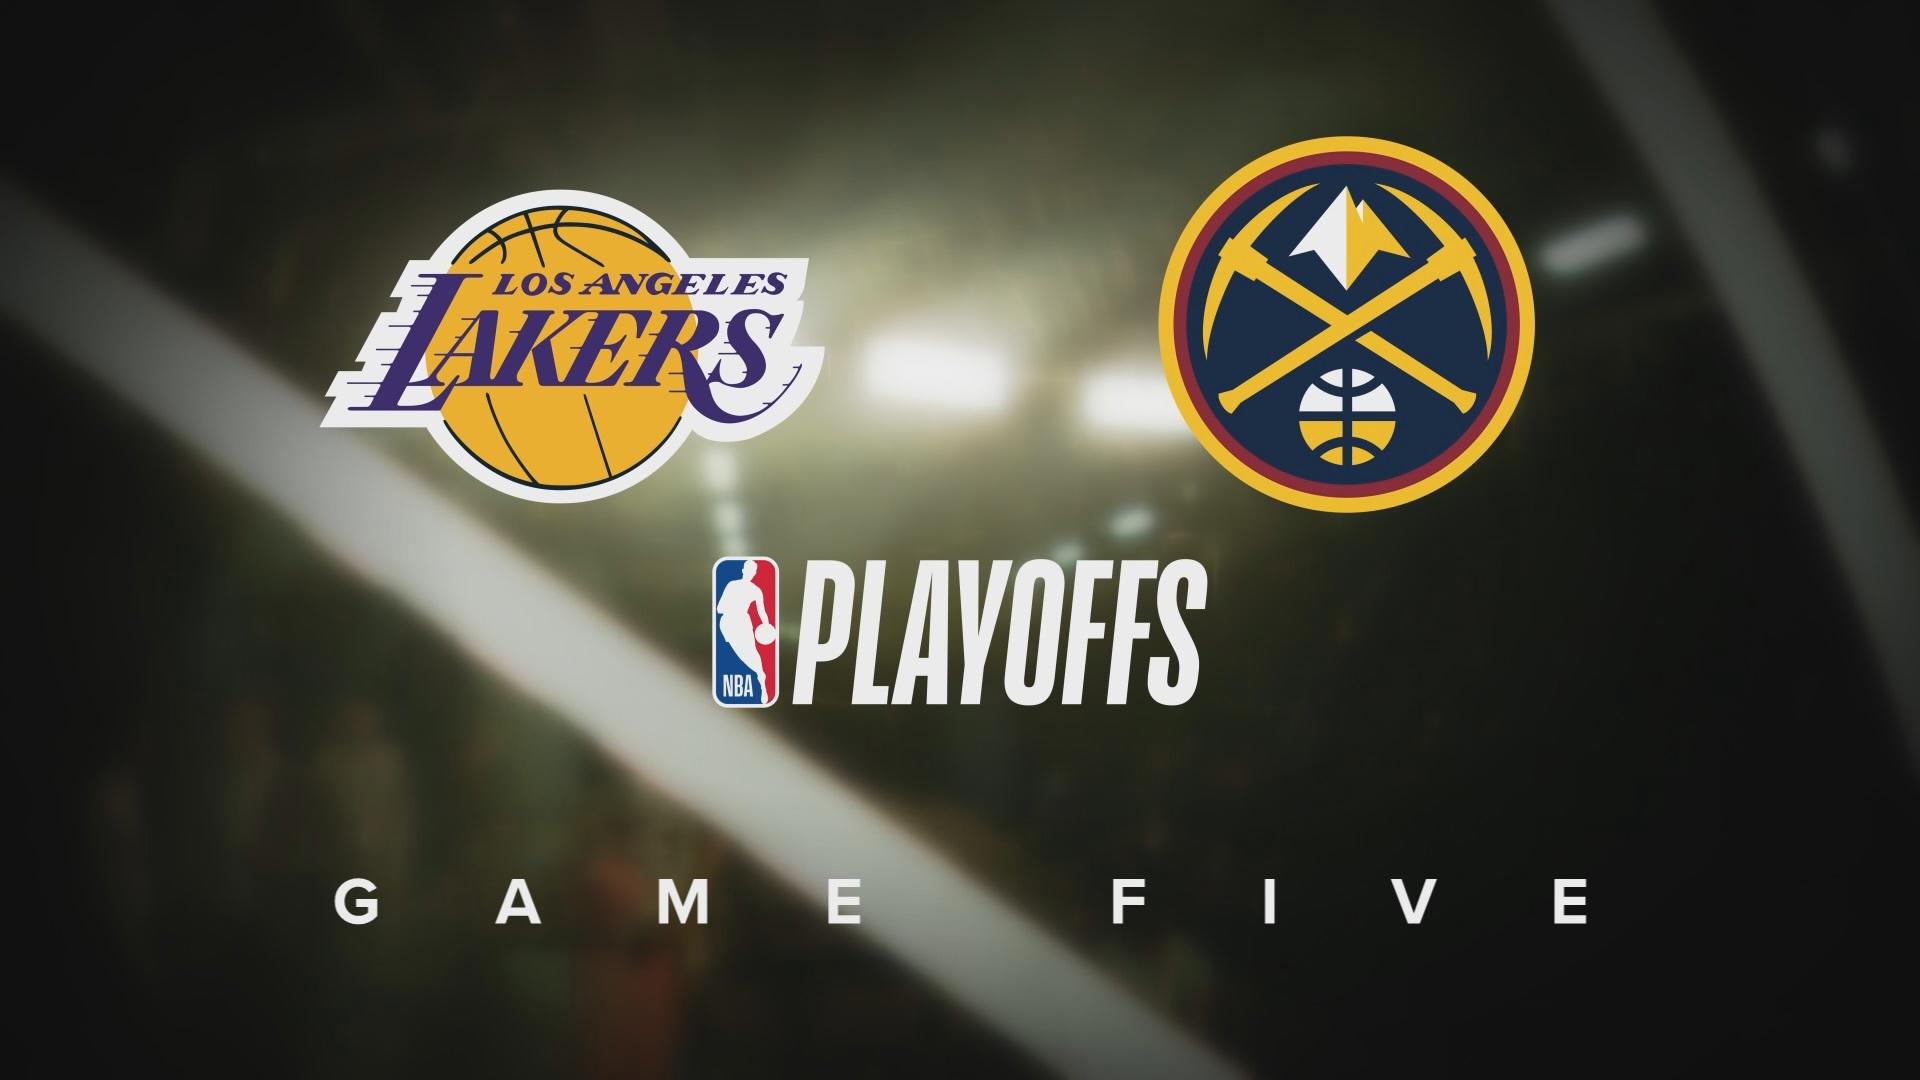 Denver and Los Angeles return to Ball Arena for the fifth game in their opening-round NBA playoff series.